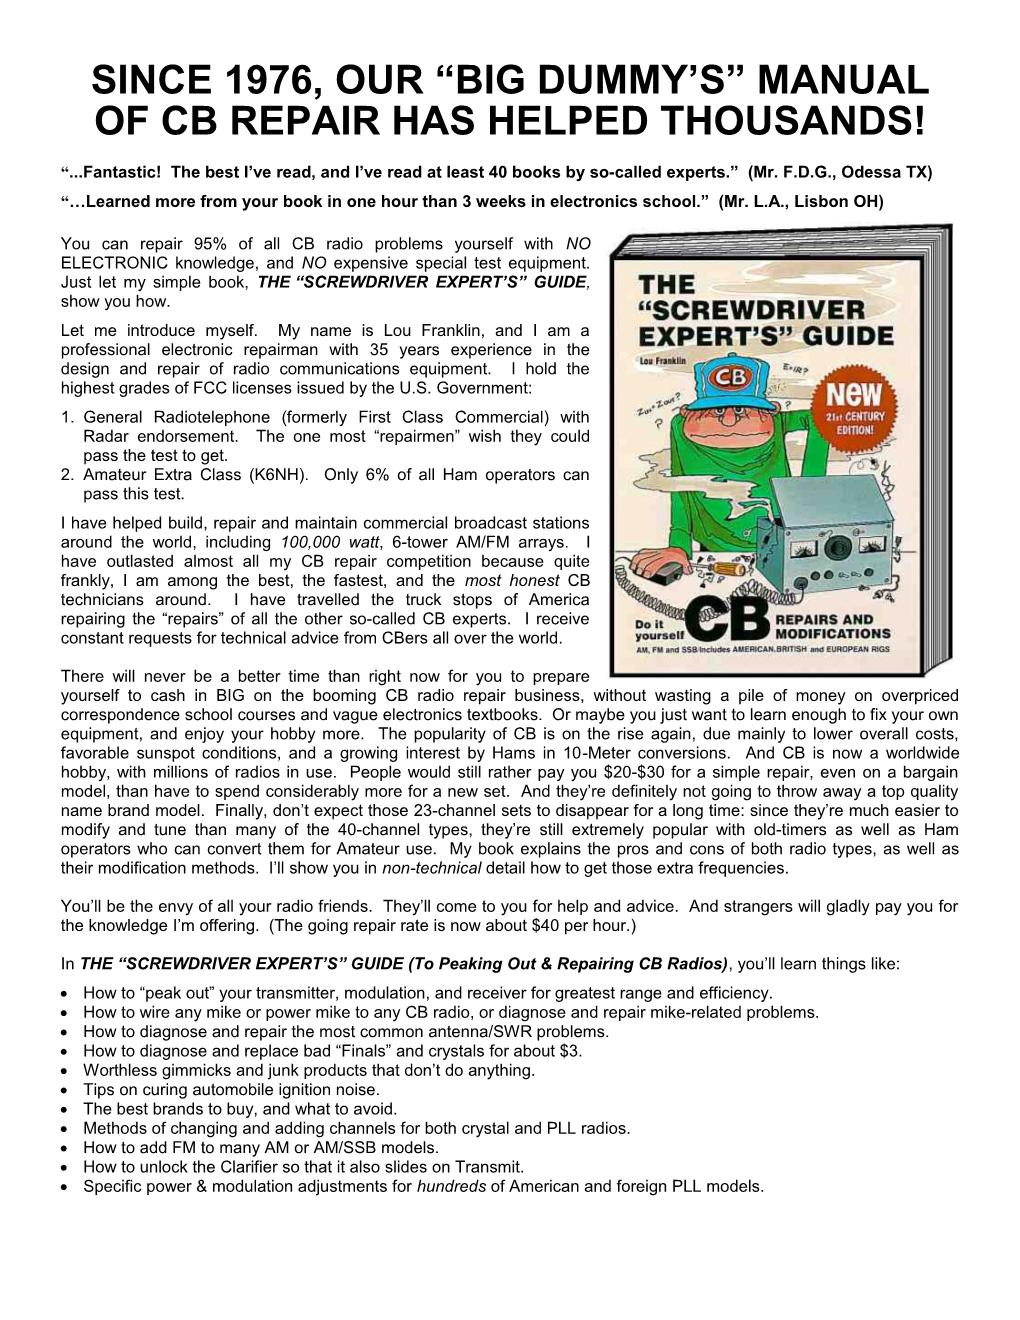 Since 1976, Our “Big Dummy’S” Manual Of Cb Repair Has Helped Thousands